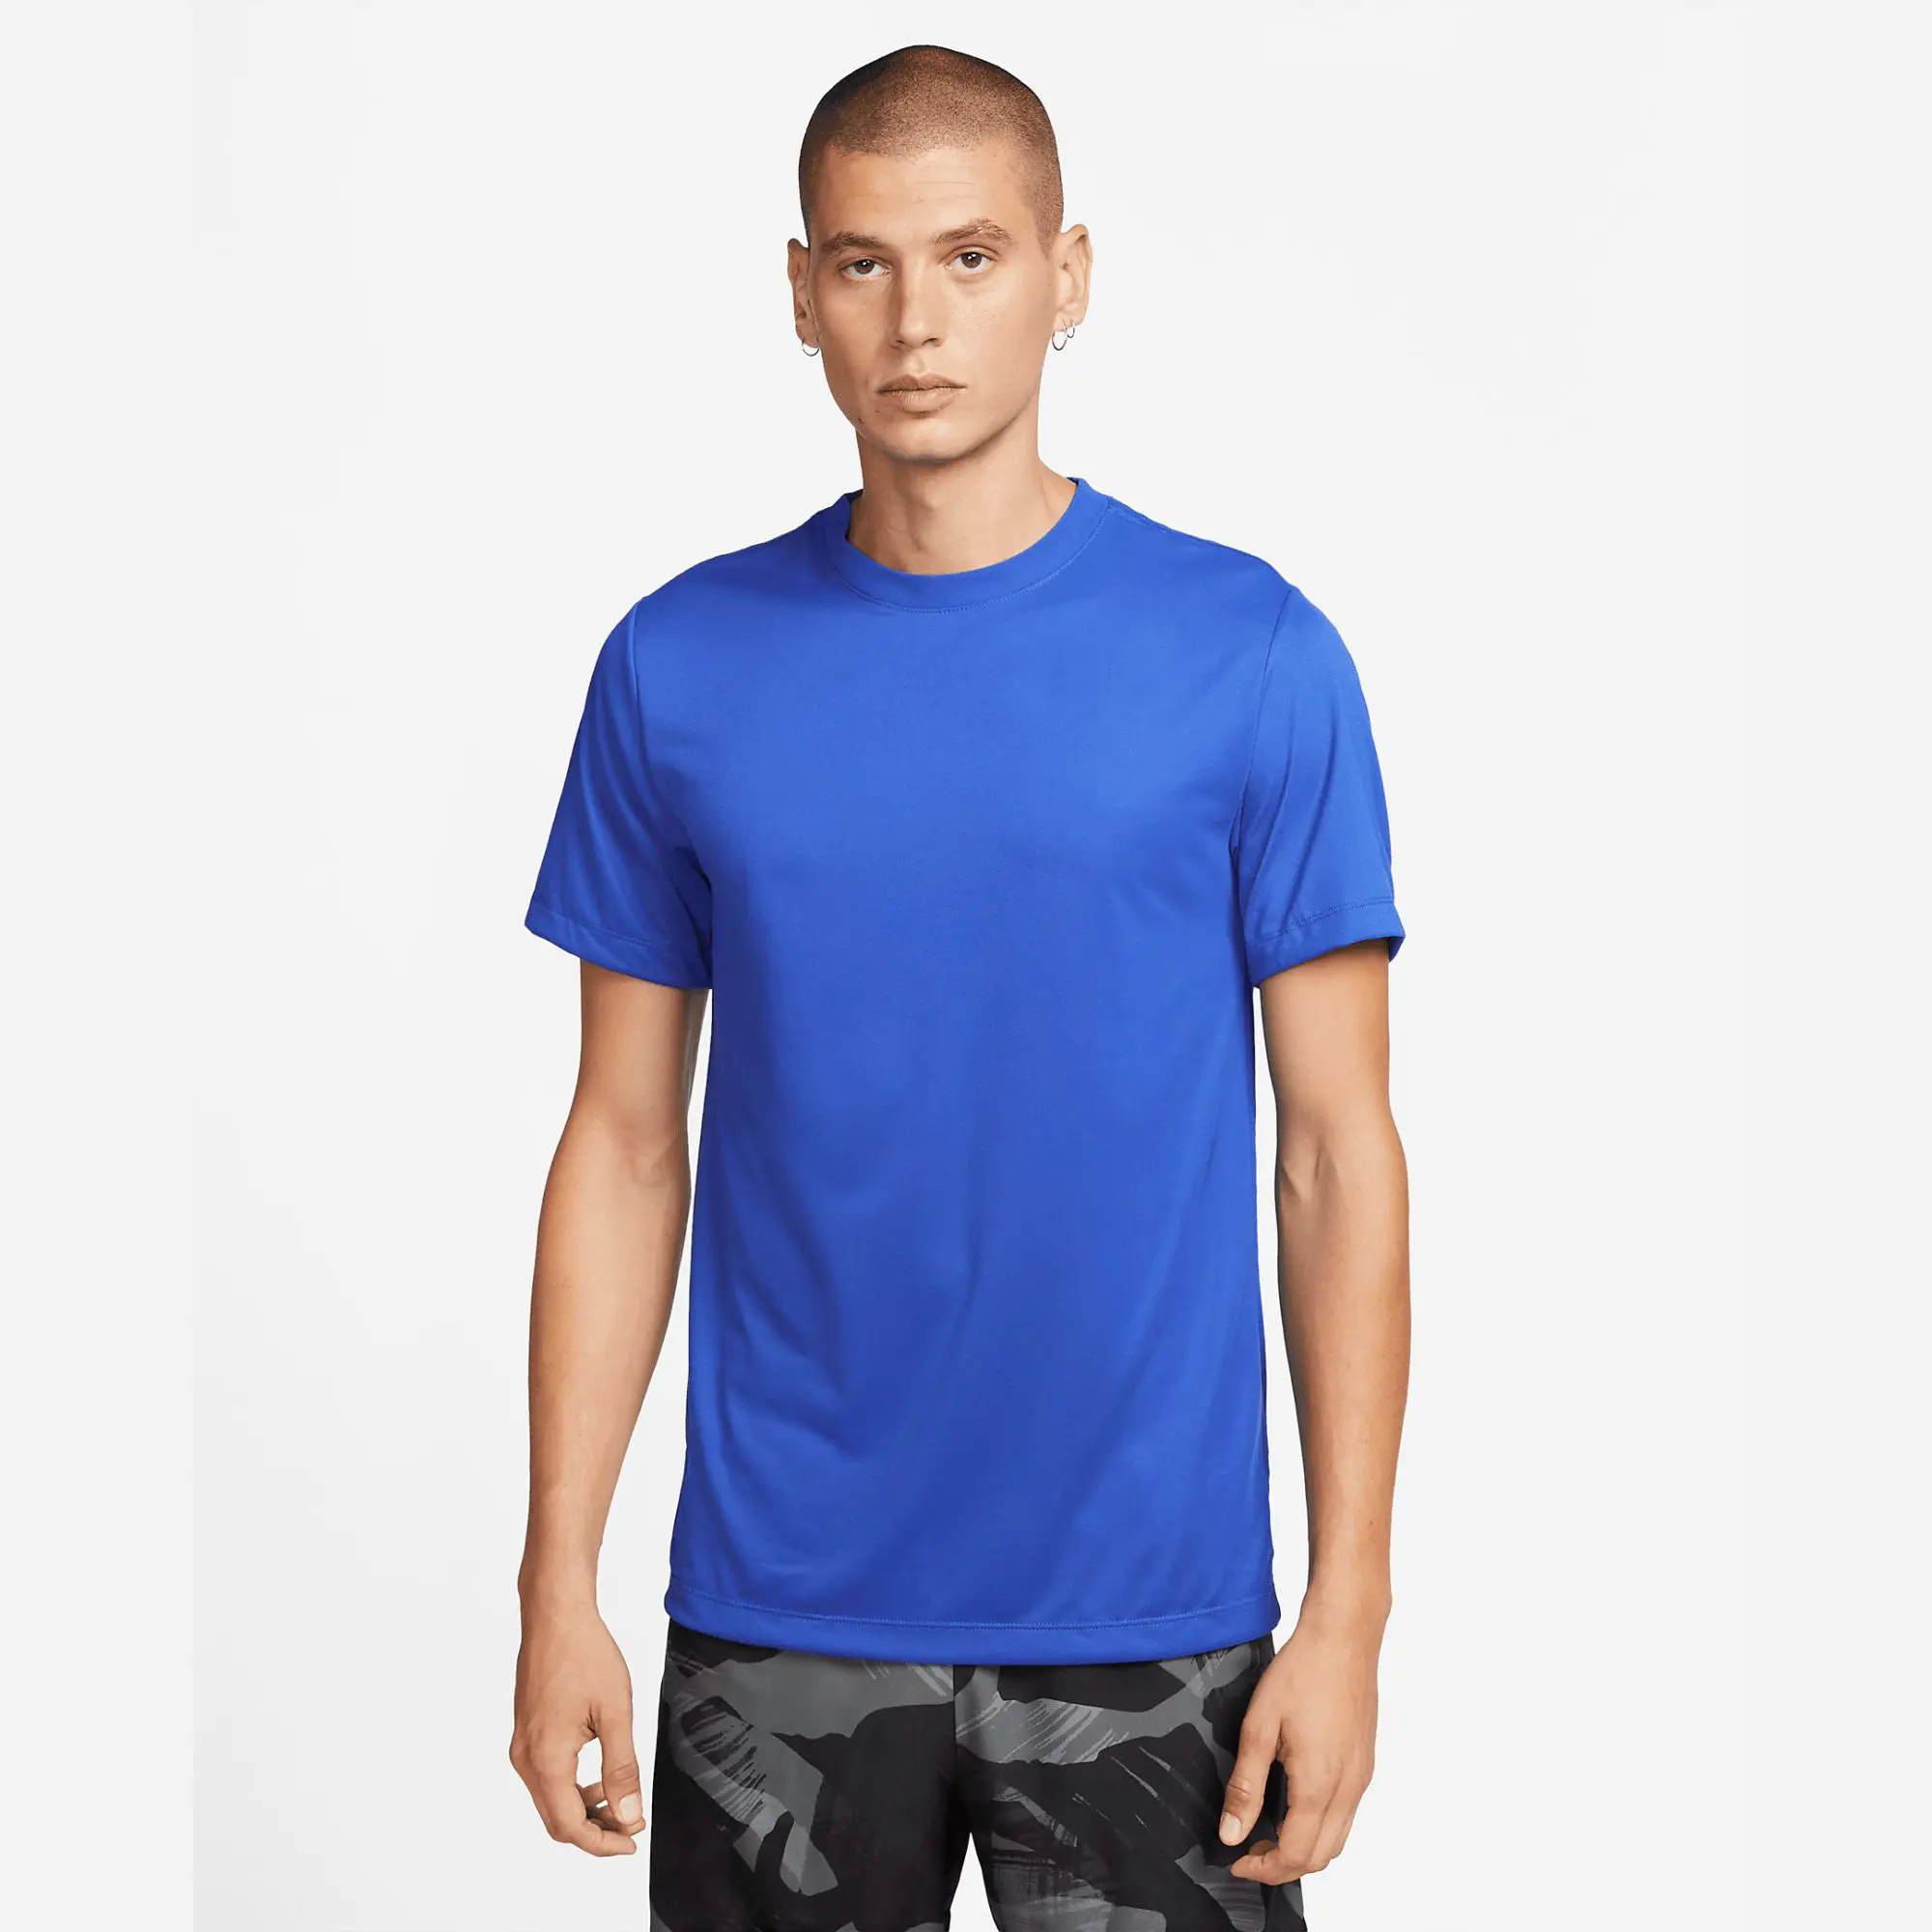 Jersey Fabric Feels Soft and Smooth Relaxed Standard fit Ribbed Neckband 100% Polyester Game Royal Mens Fitness T-Shirt